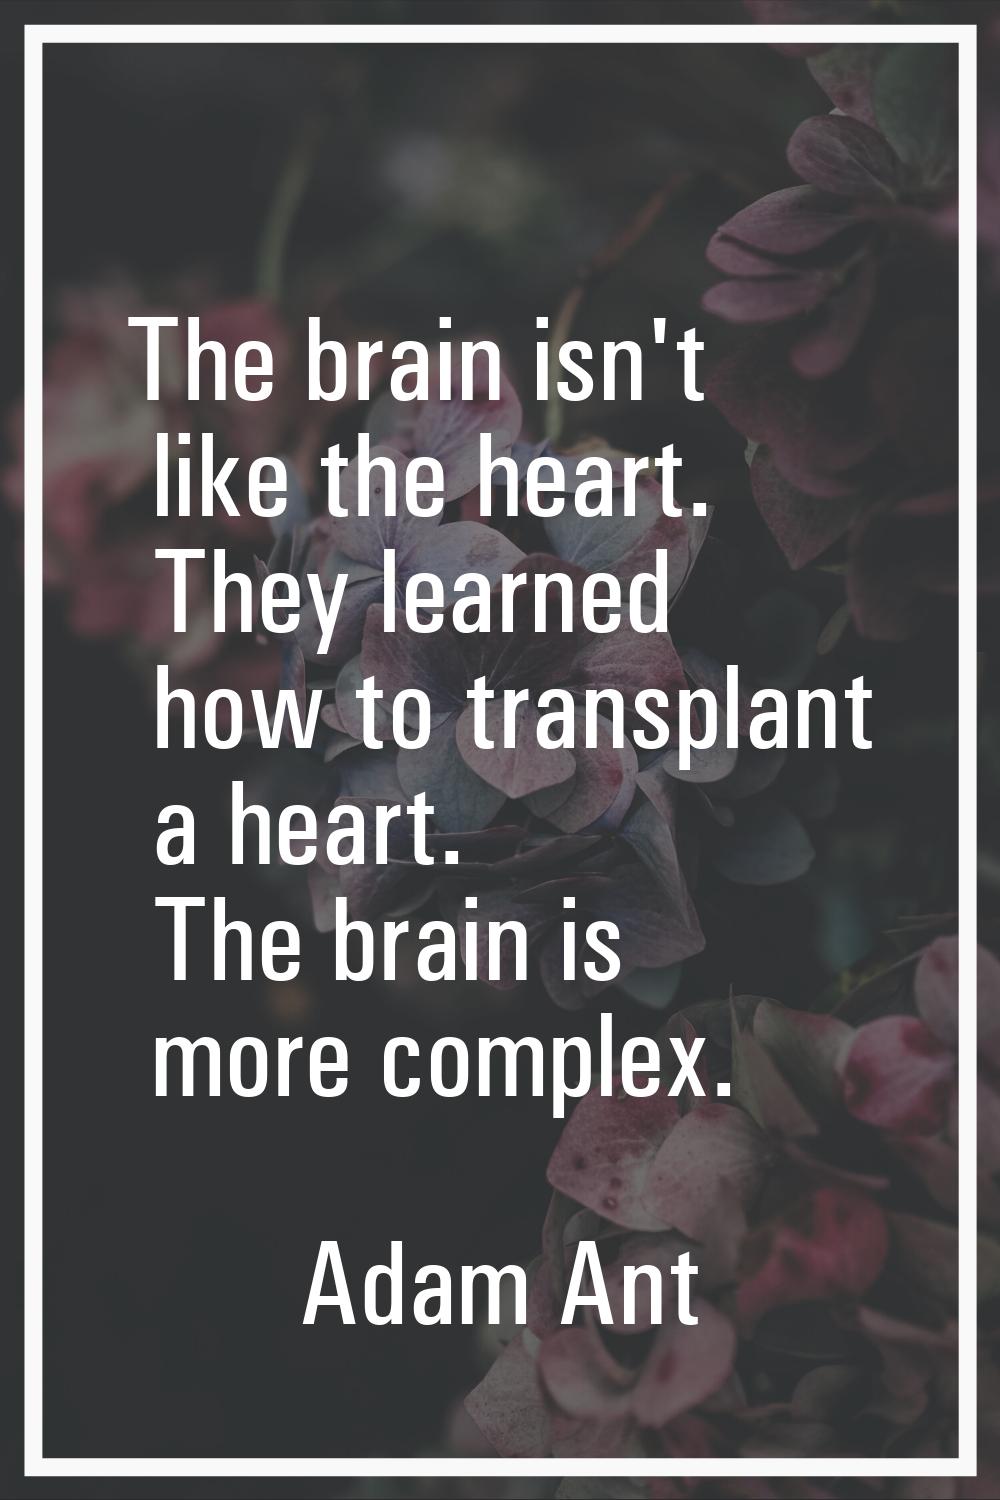 The brain isn't like the heart. They learned how to transplant a heart. The brain is more complex.